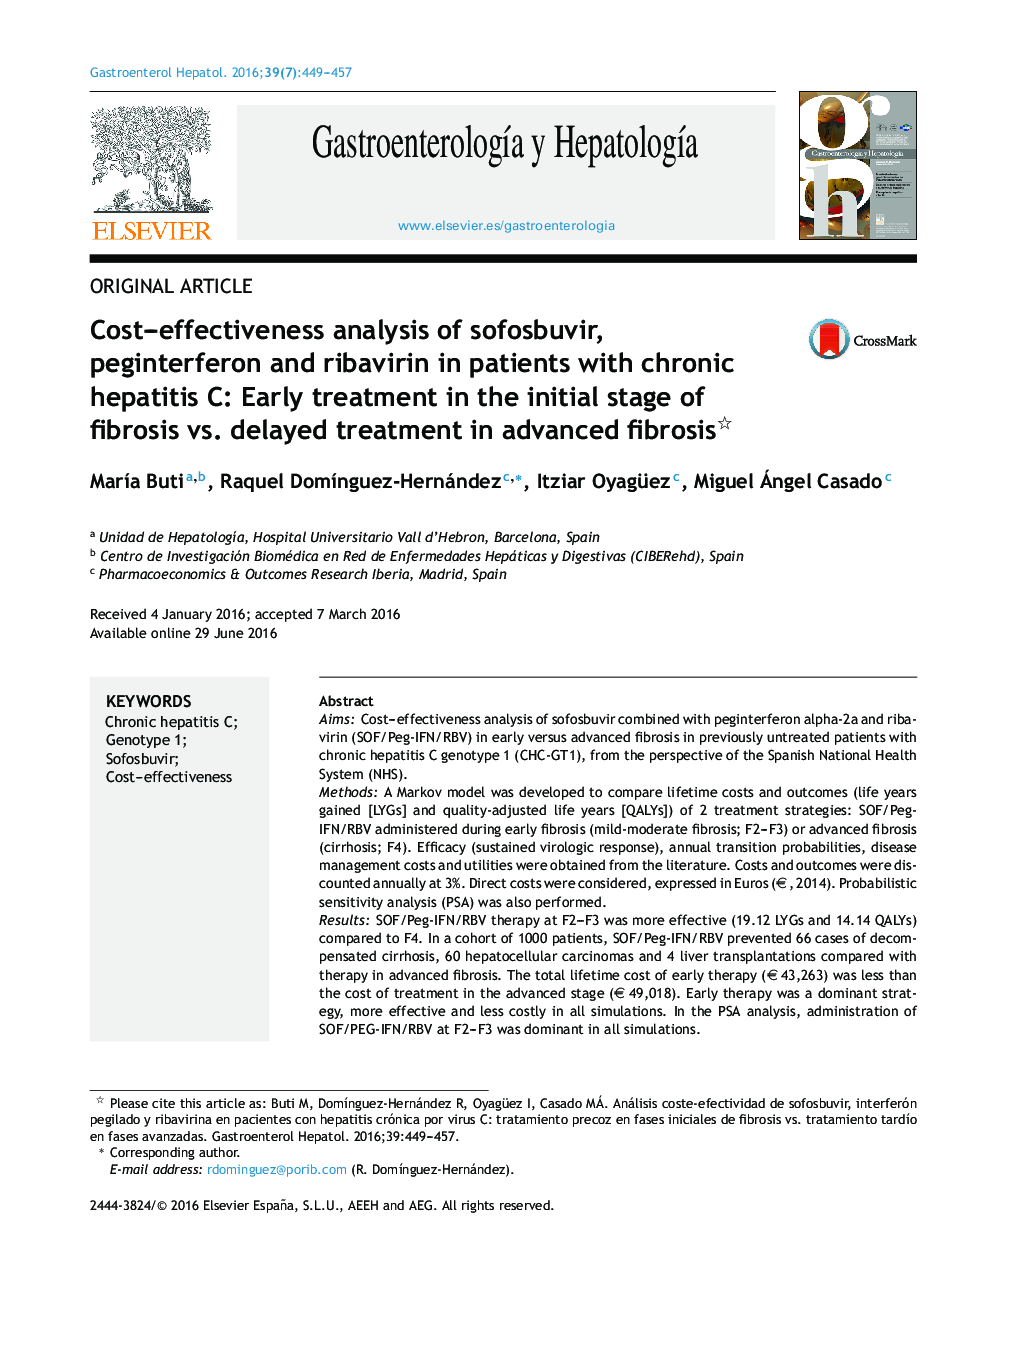 Cost–effectiveness analysis of sofosbuvir, peginterferon and ribavirin in patients with chronic hepatitis C: Early treatment in the initial stage of fibrosis vs. delayed treatment in advanced fibrosis 